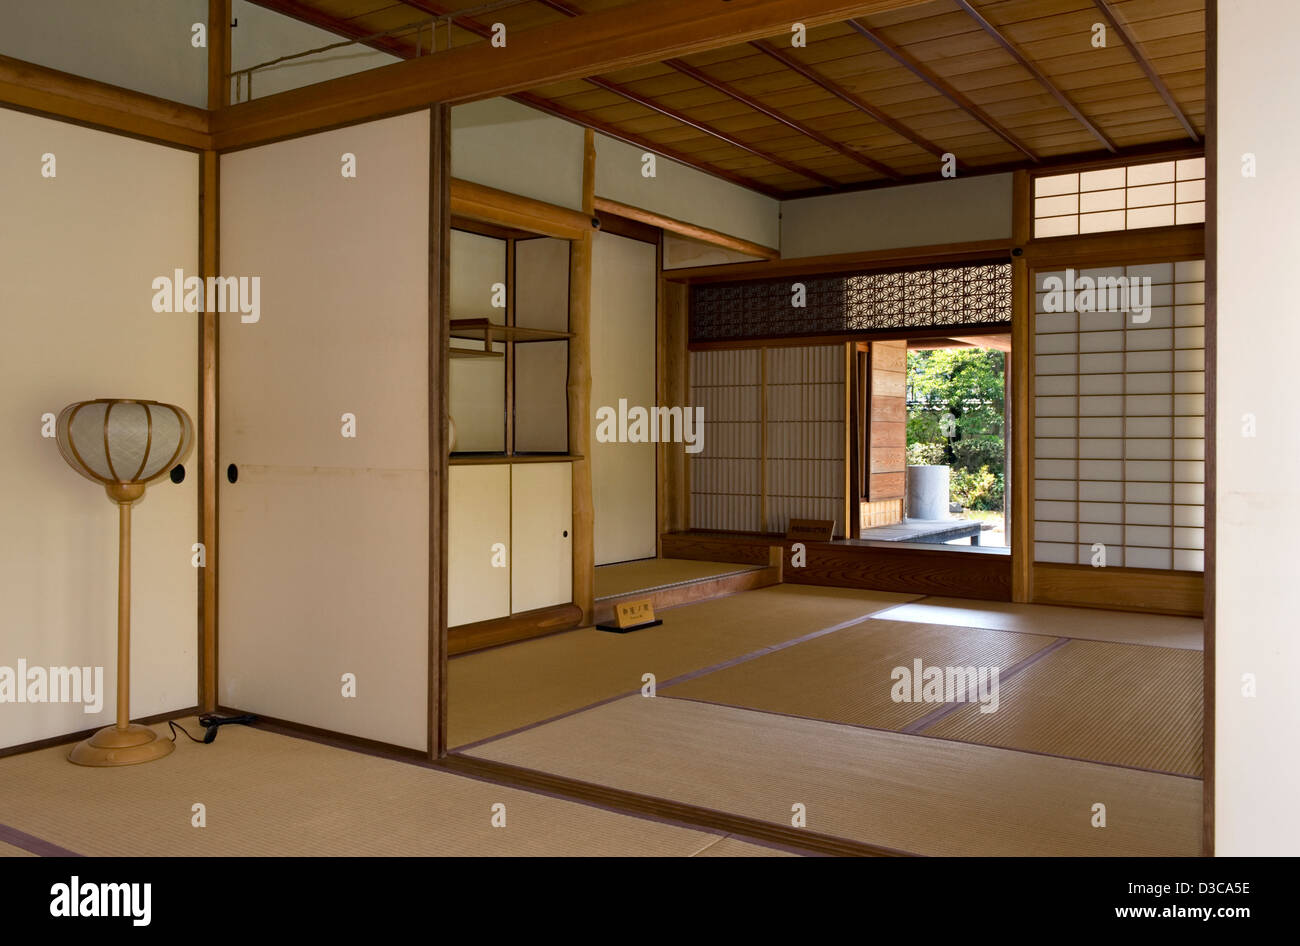 Natural warm wood tones, tatami mat floor and sliding shoji screens of traditional Japanese architecture in a residence interior Stock Photo